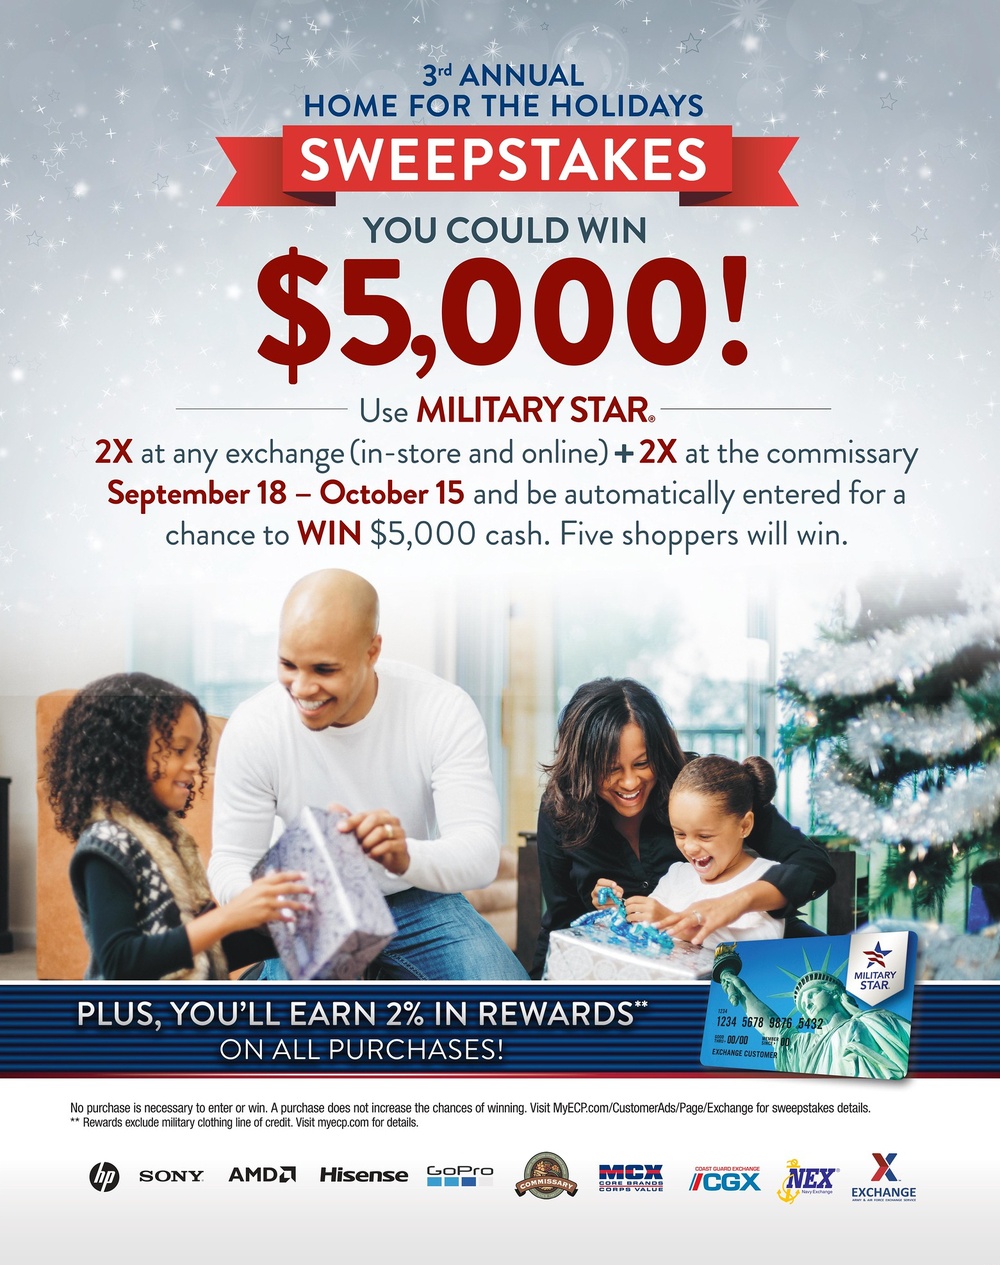 MILITARY STAR Home for the Holidays Sweepstakes